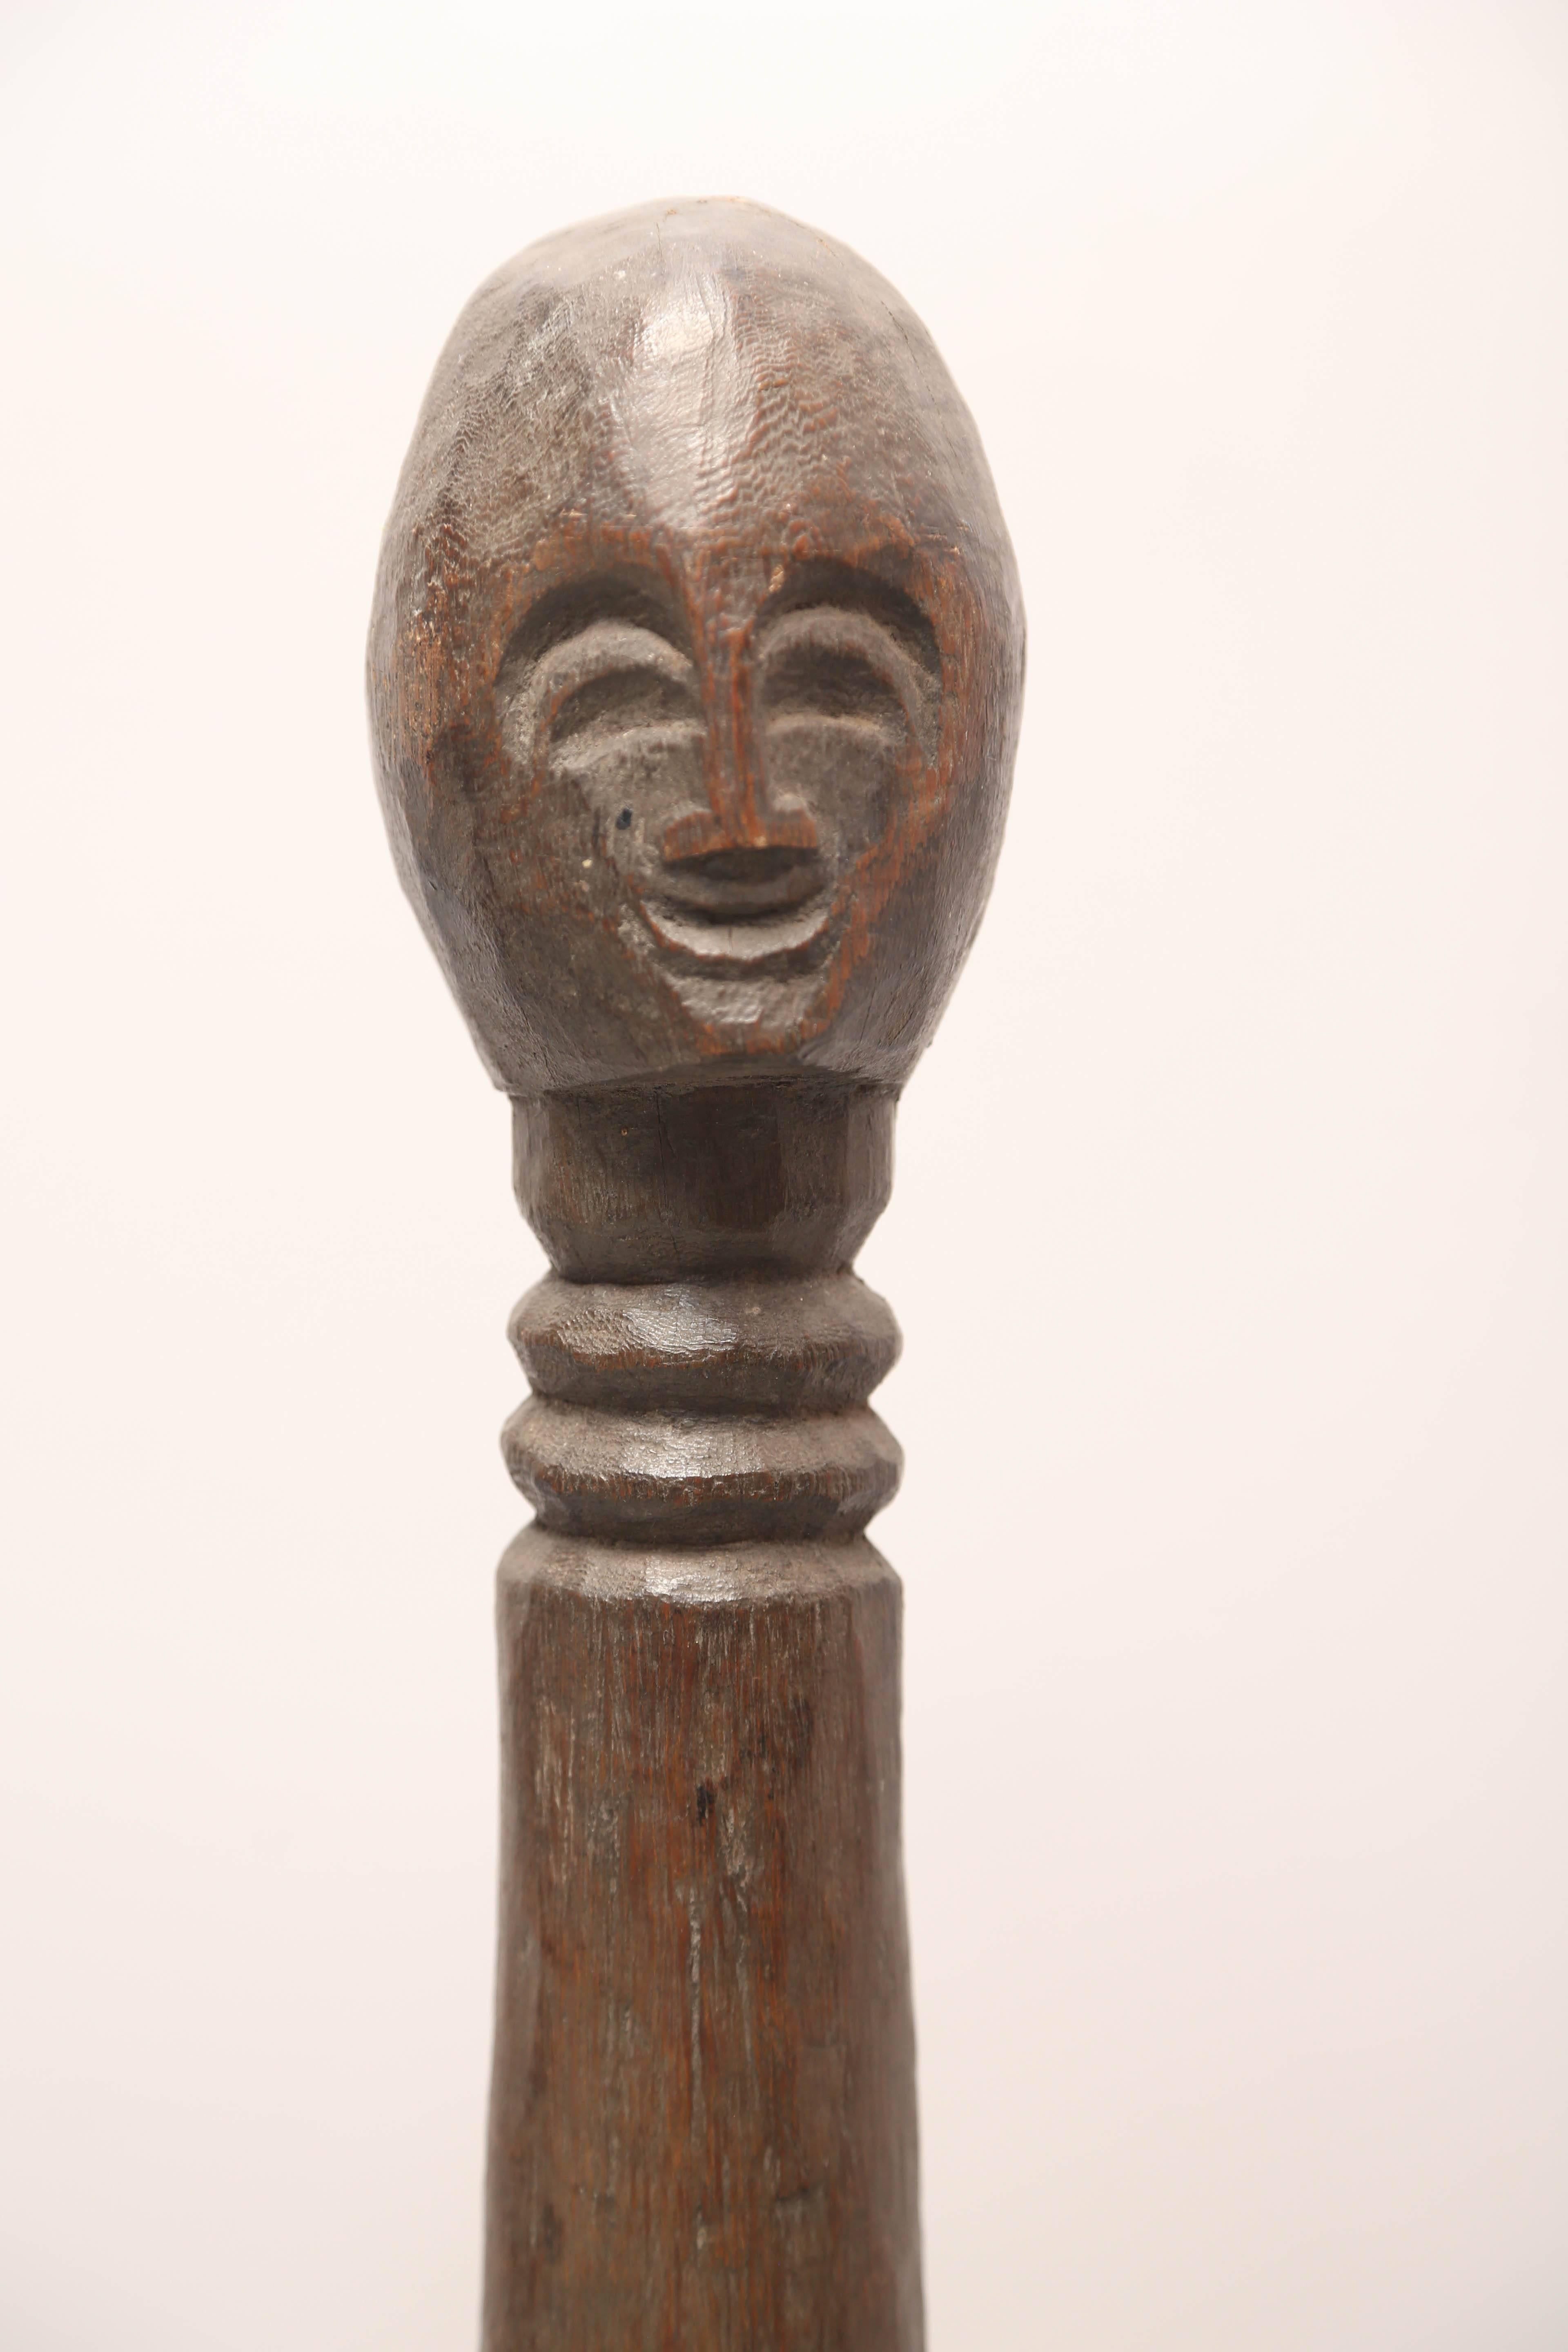 Carved SALE !SALE! SALE! pr./AFRICAN SEXUAL SYMBOLS.appears to be male but breasts